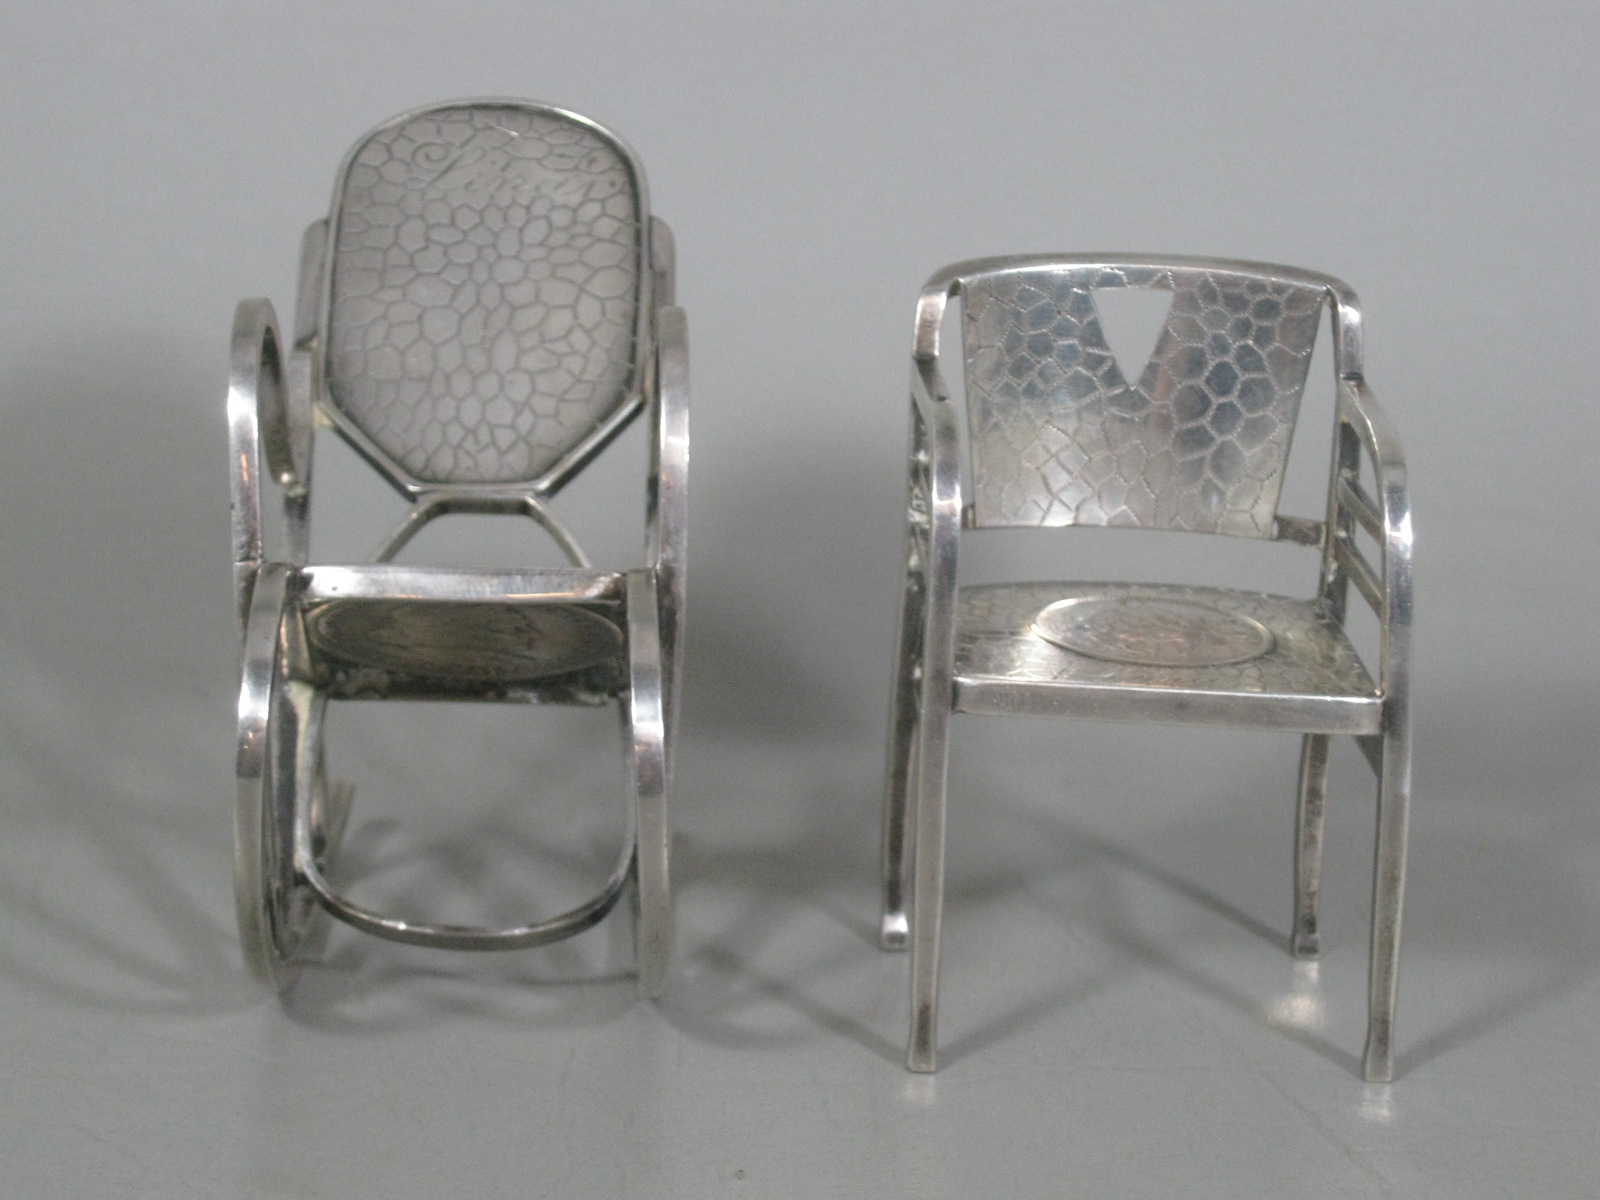 2 Vtg Antique Sterling? Silver Miniature Coin Chairs 1893 1/2 Dollar 1896 Korona 1